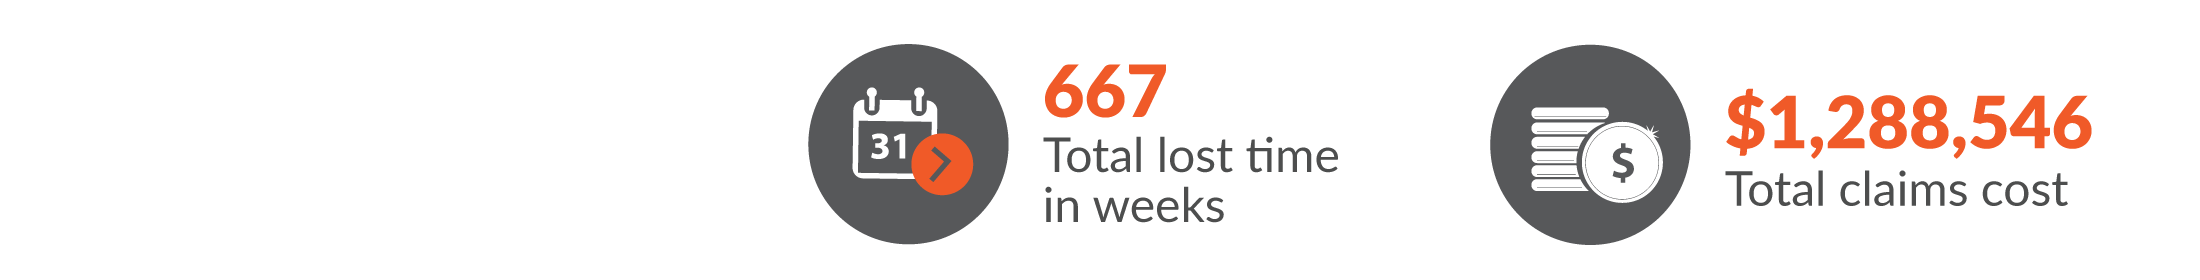 This infographic shows total Accommodation, café and restaurants claims resulted in 667 total lost time in weeks and $1,288,546 was paid in benefits.